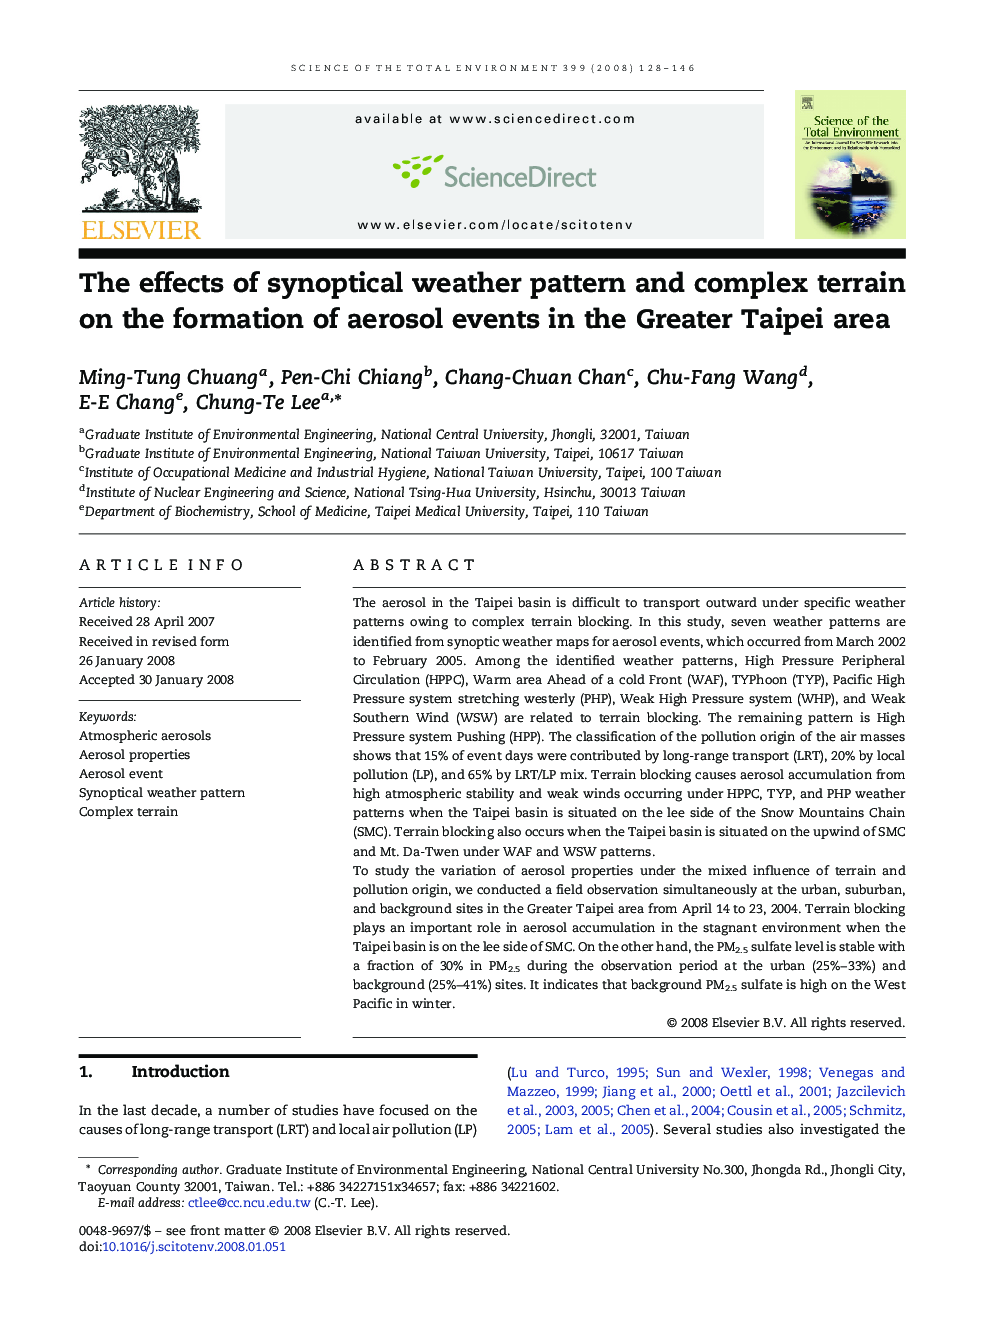 The effects of synoptical weather pattern and complex terrain on the formation of aerosol events in the Greater Taipei area